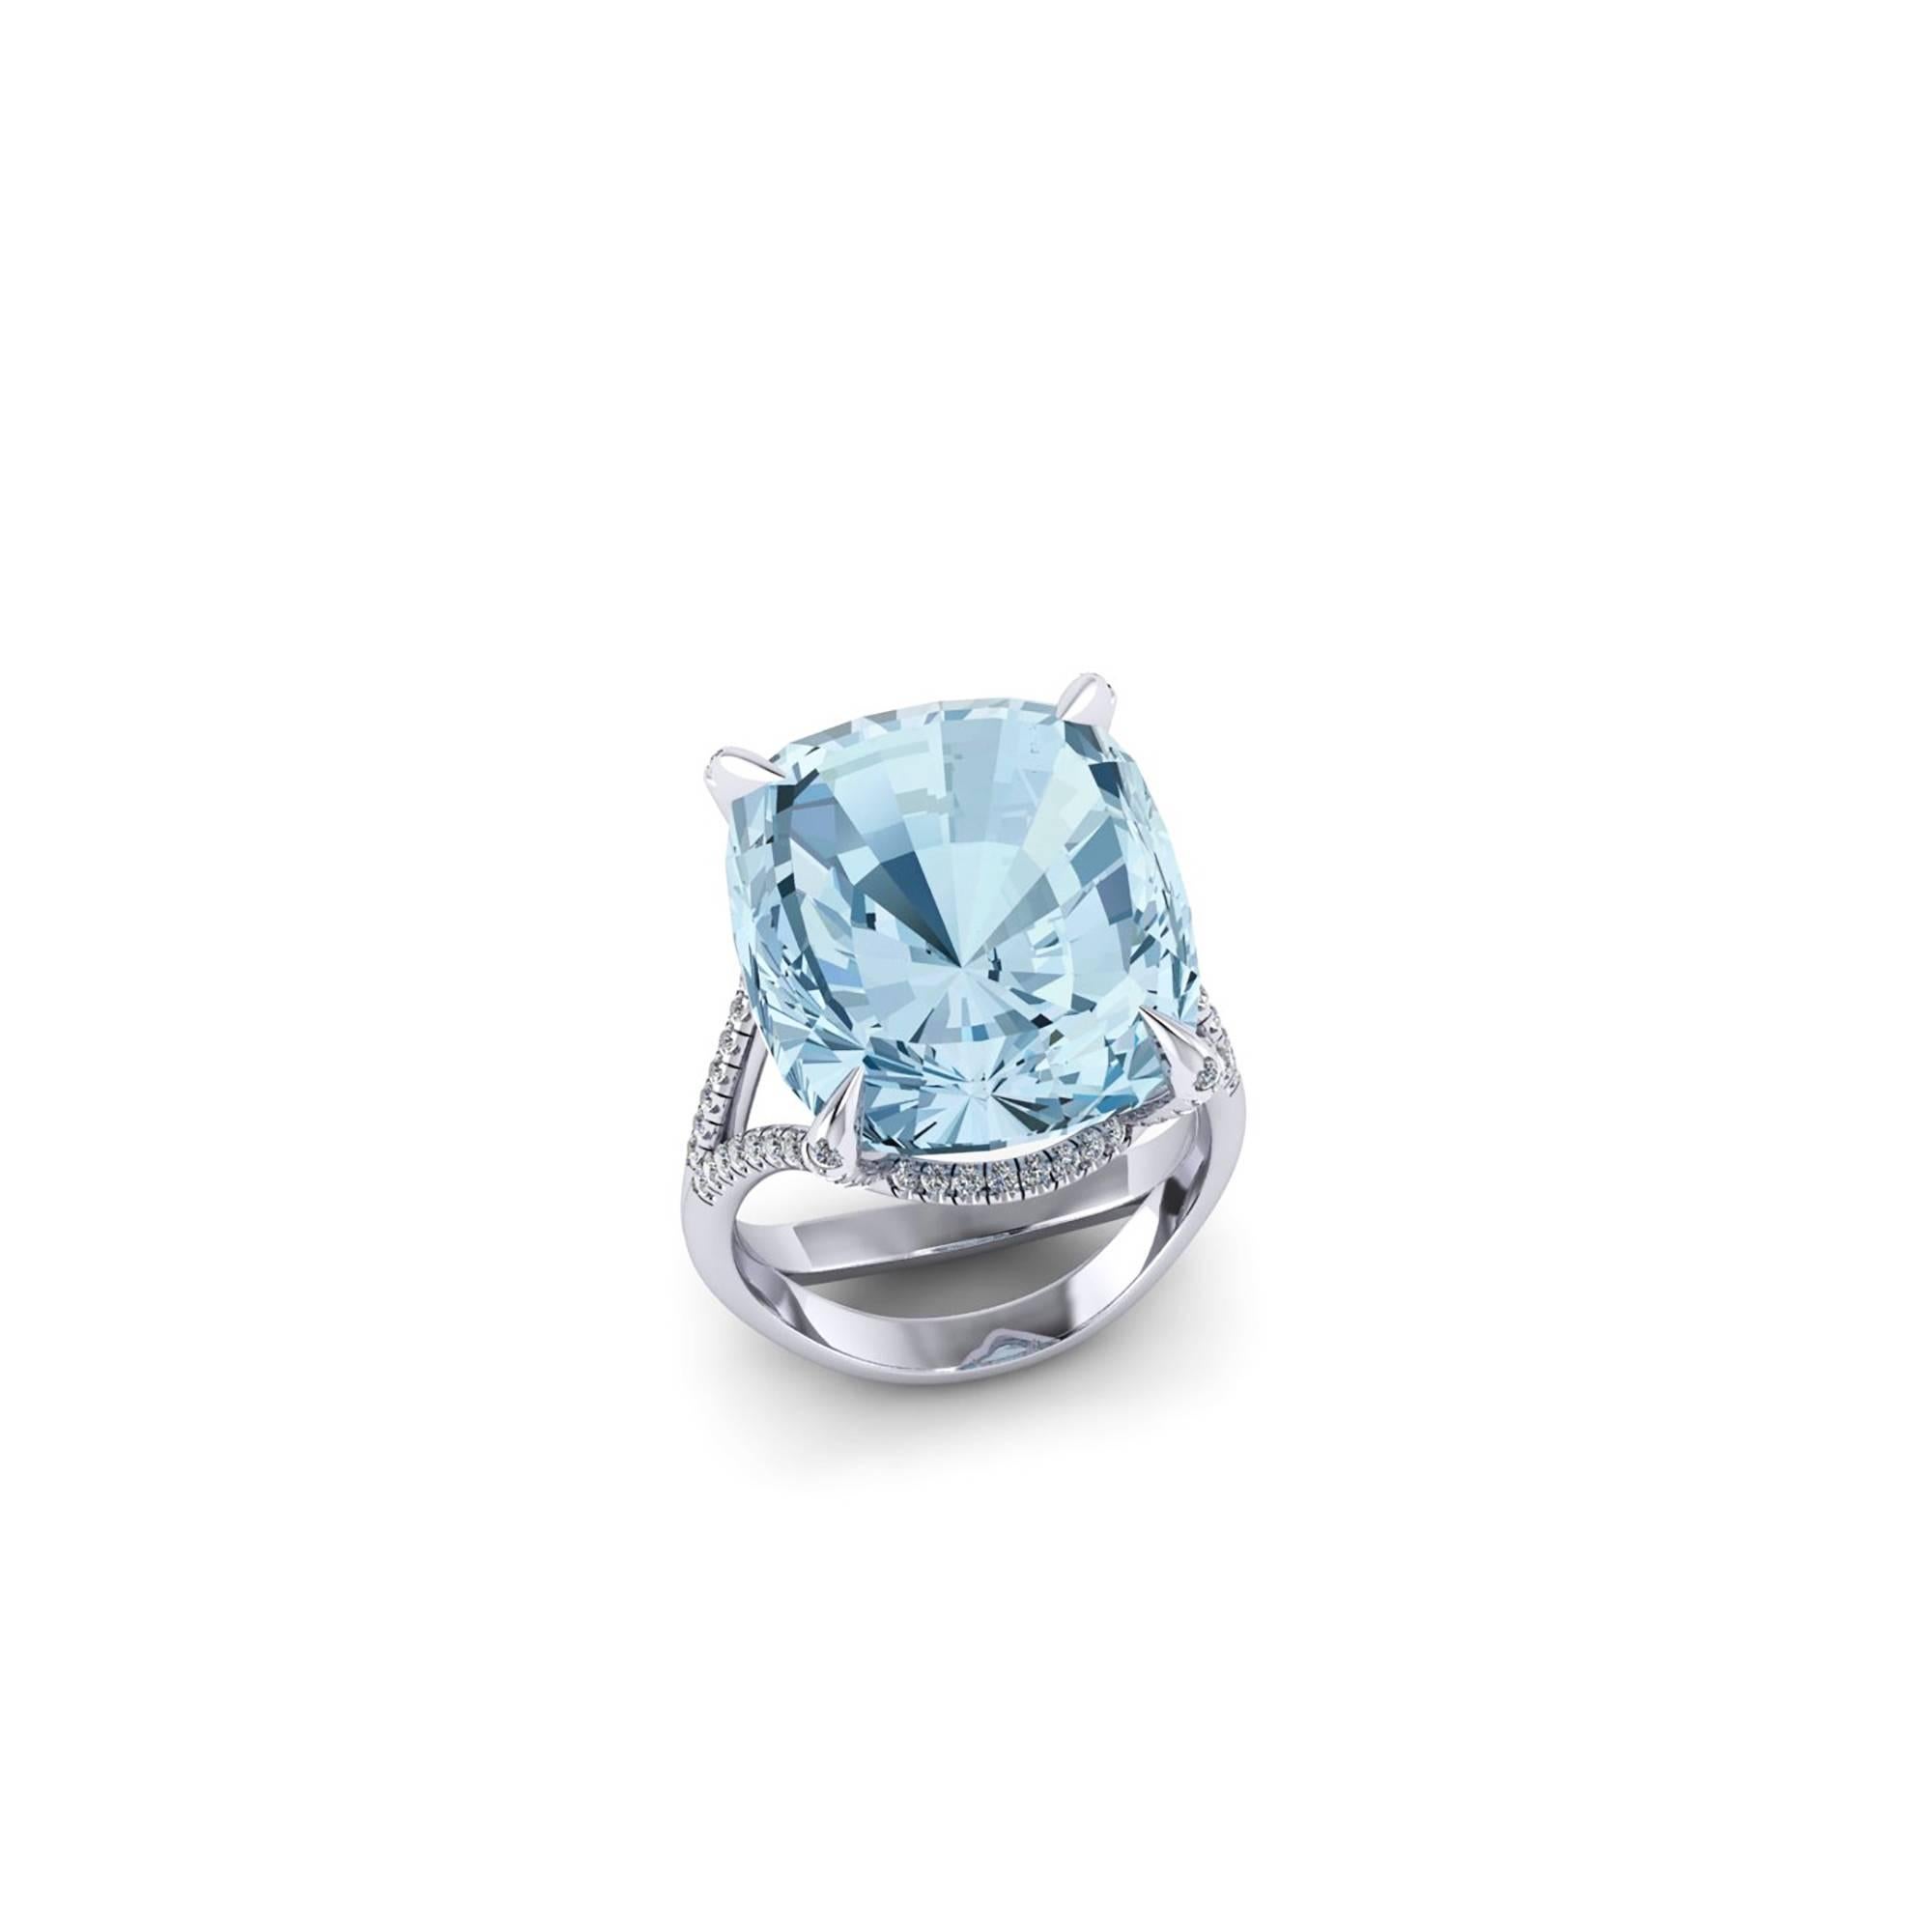 from Ferrucci an approximate stunning 22.1 carat Aquamarine, set in a uniquely designed 18k white gold ring by master jeweler Francesco Ferrucci, with white bright diamonds of 0.50 carats to enlight a splendid blue mineral.
Entirely made in New York